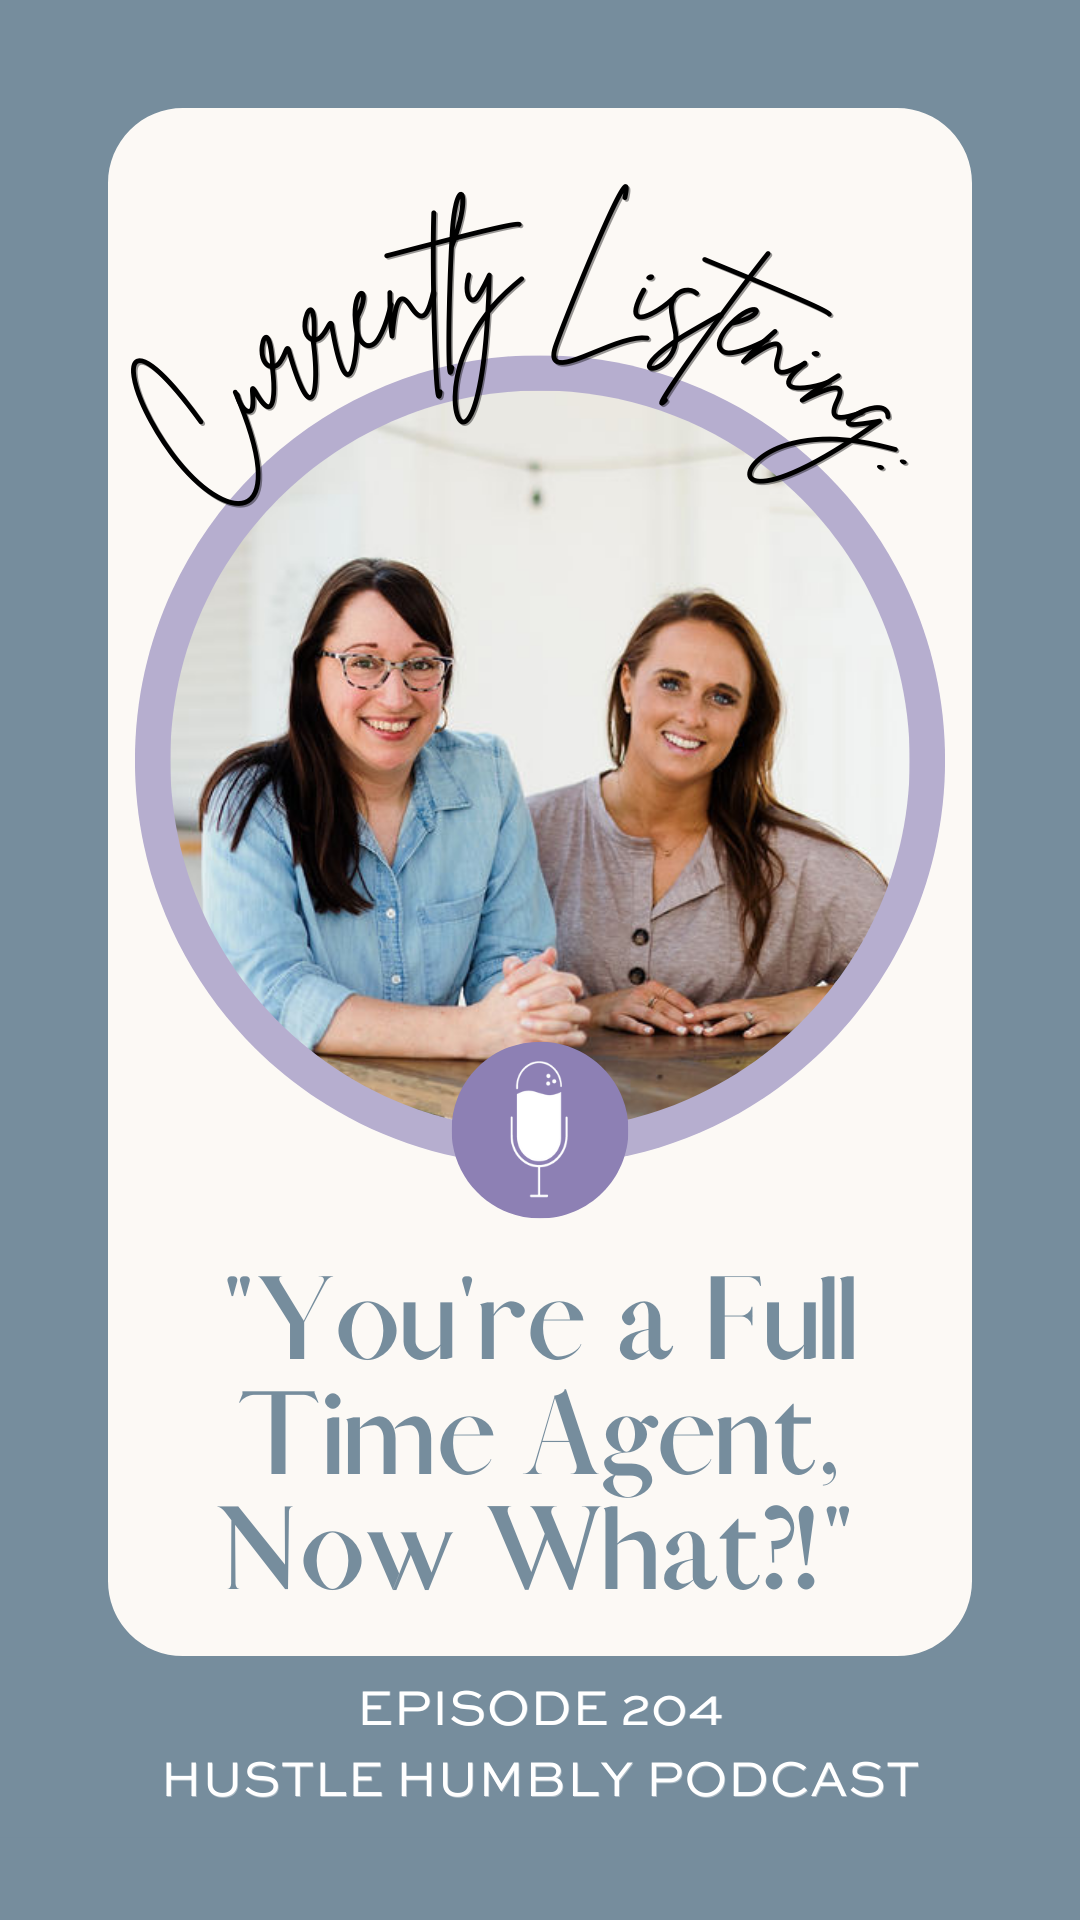 Hustle Humbly Episode 204: You're a Full Time Agent, Now What?!